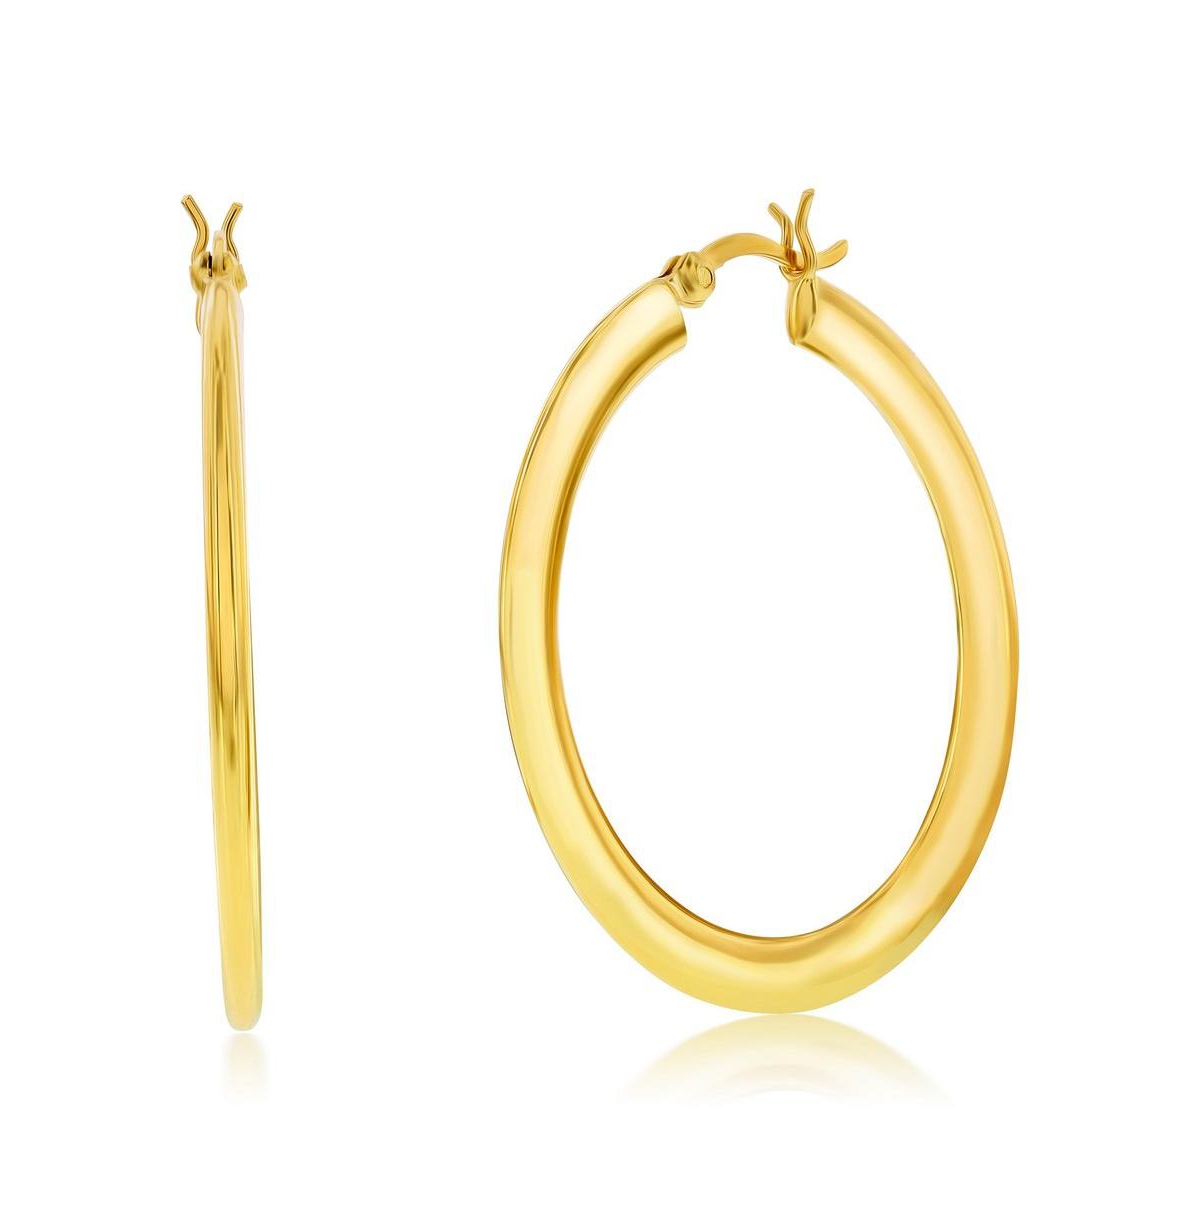 SIMONA STERLING SILVER OR GOLD PLATED OVER STERLING SILVER 40MM POLISHED FLAT HOOP EARRINGS